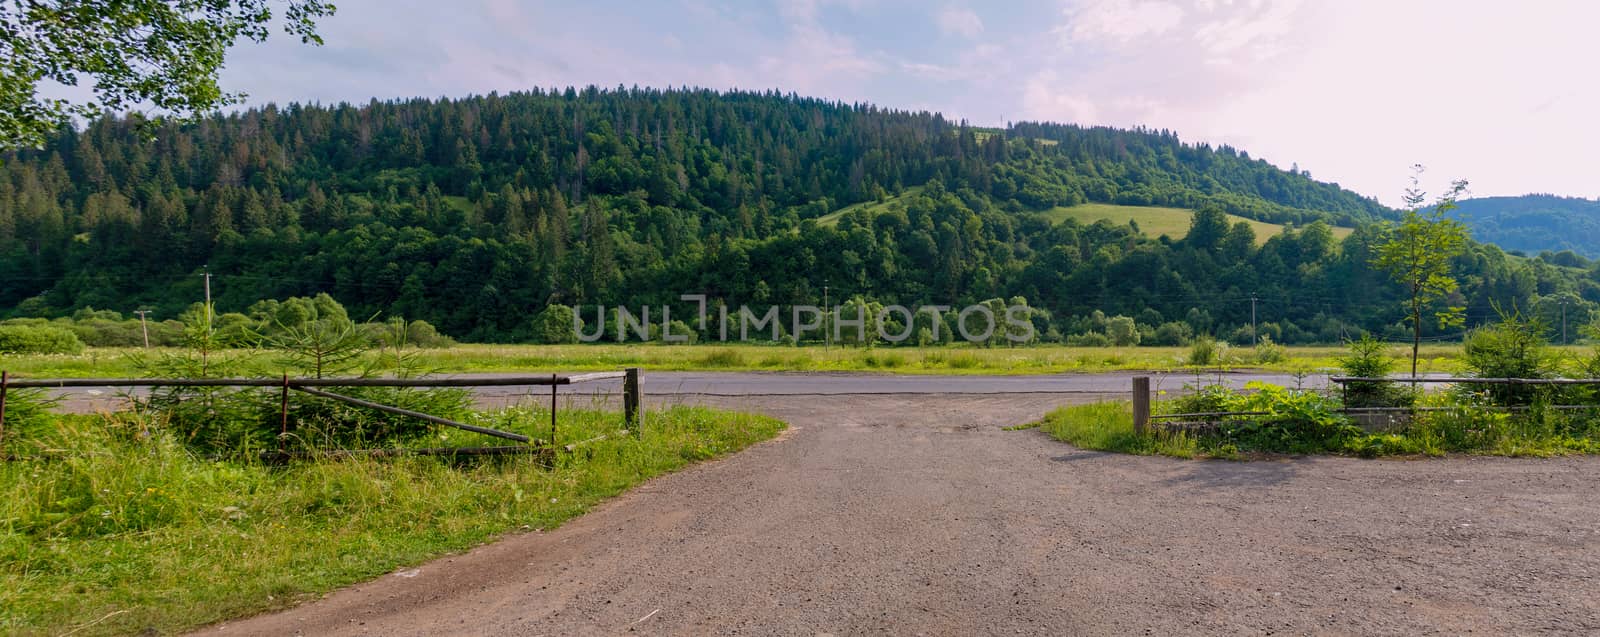 Extensive country road in the background of a mountain with green trees